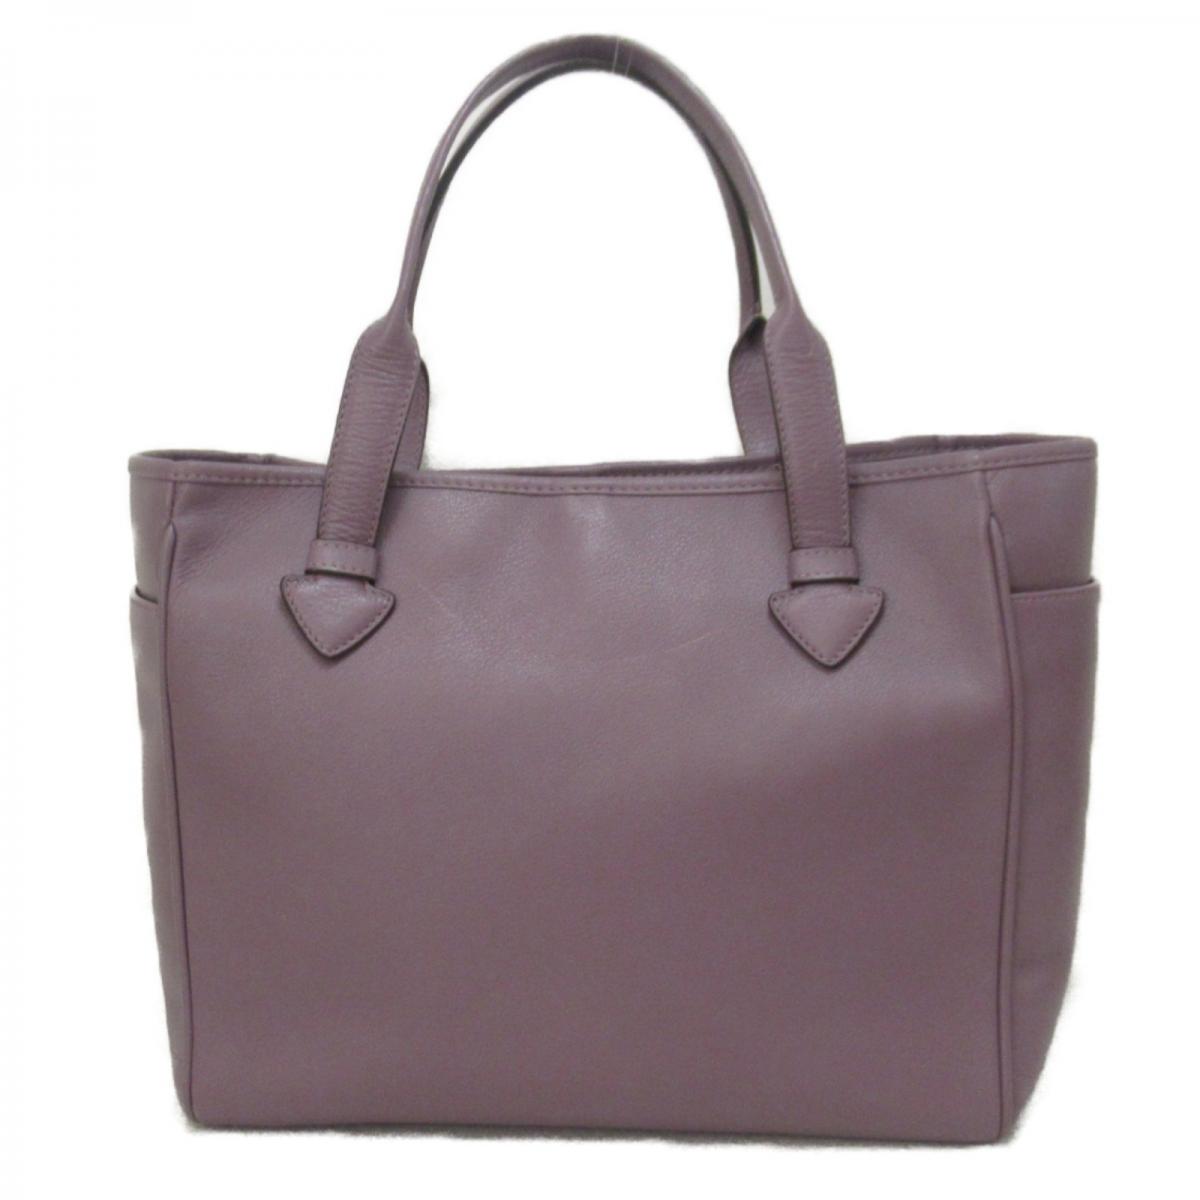 Leather Heritage Tote Bag